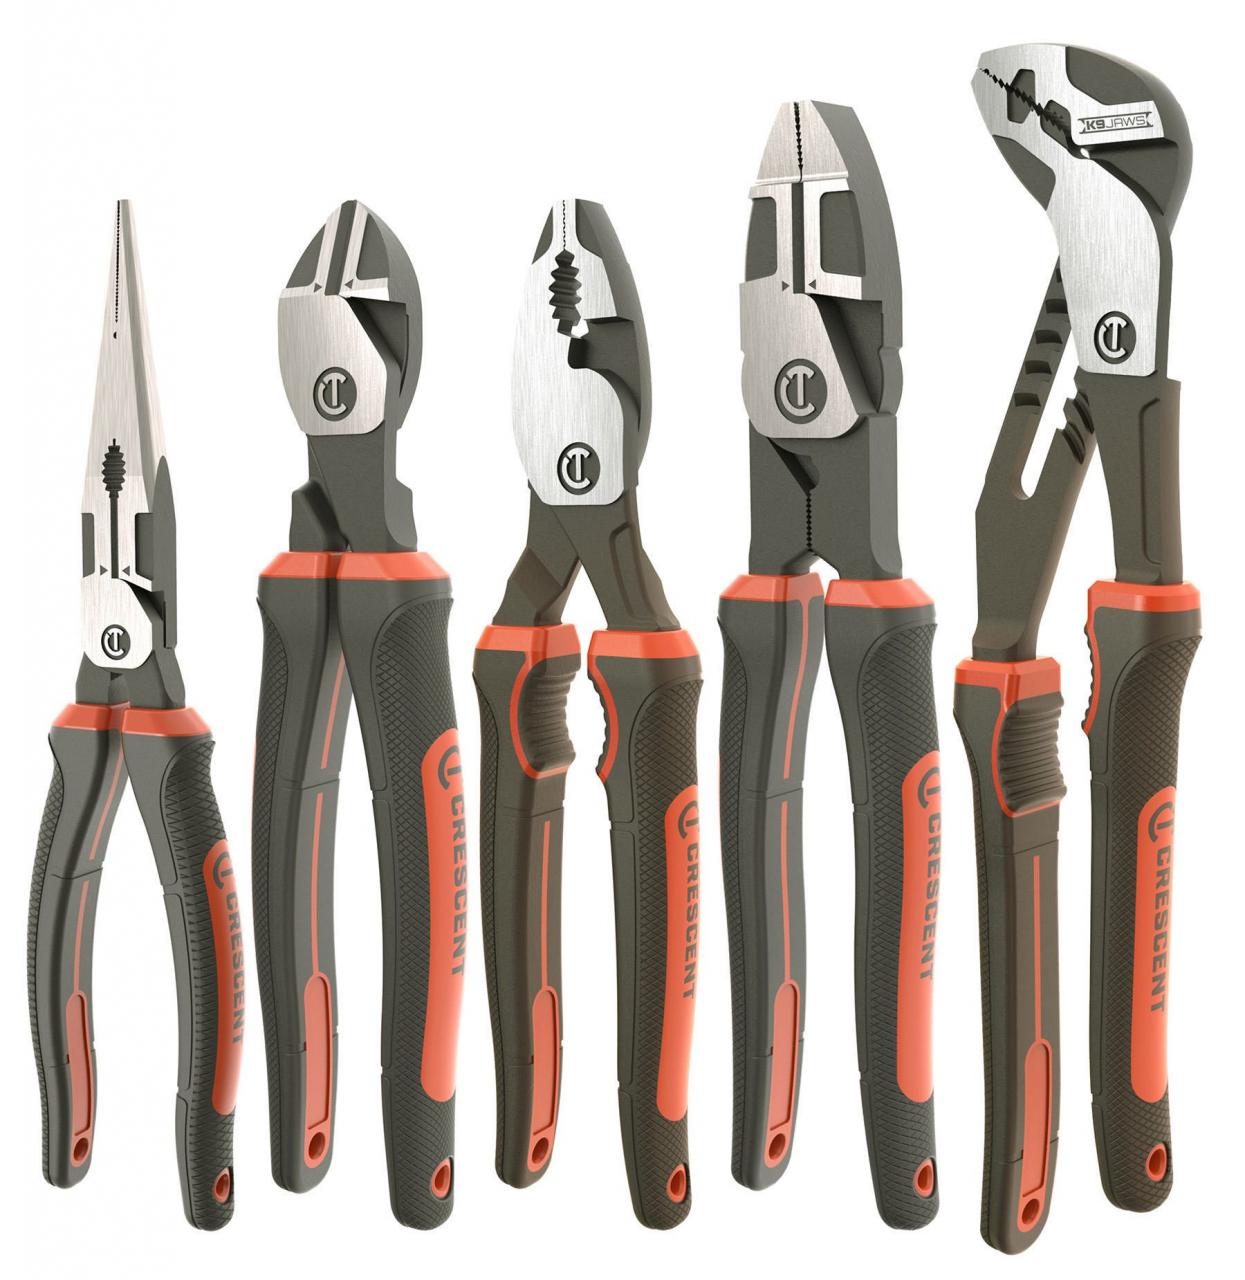 Crescent Tools launches new line of Z2 pliers - Fastener Engineering